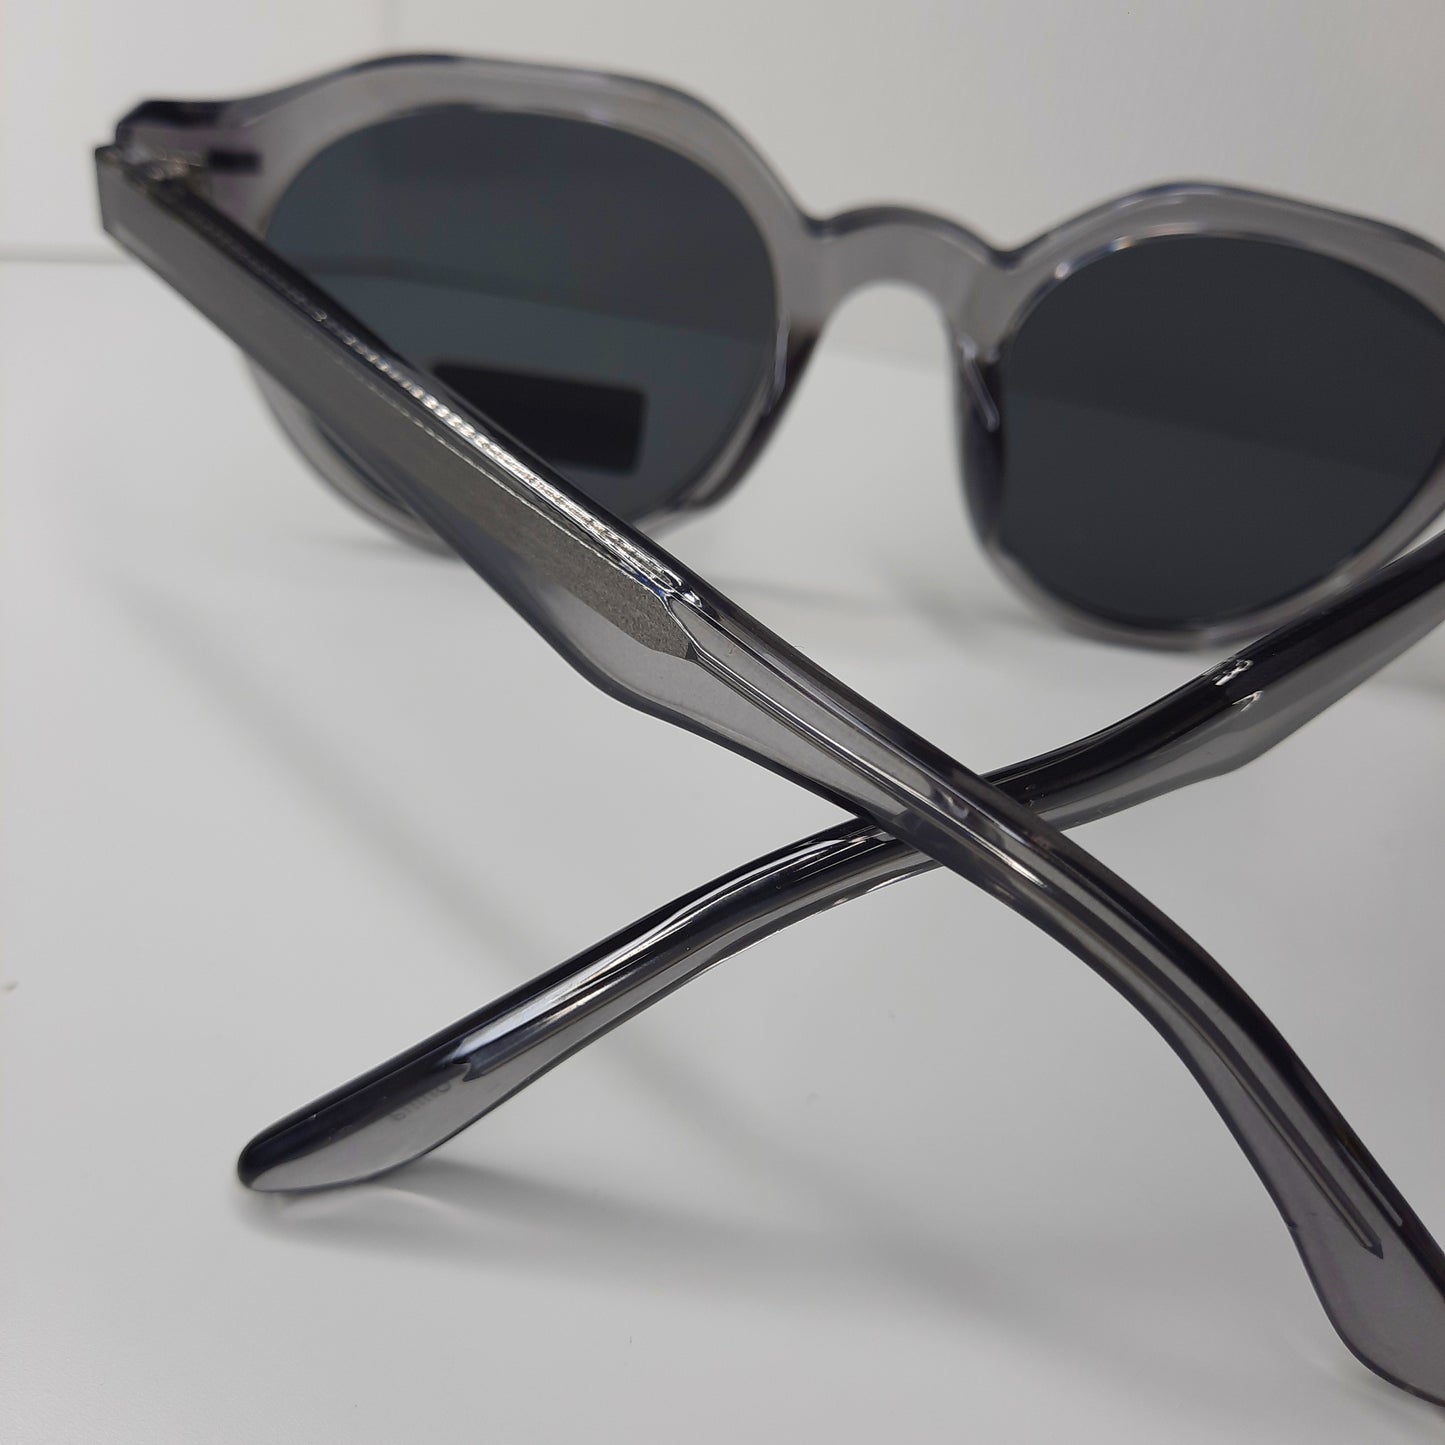 Translucent Skies Rounded Sunglasses (Grey, Black, Brown)